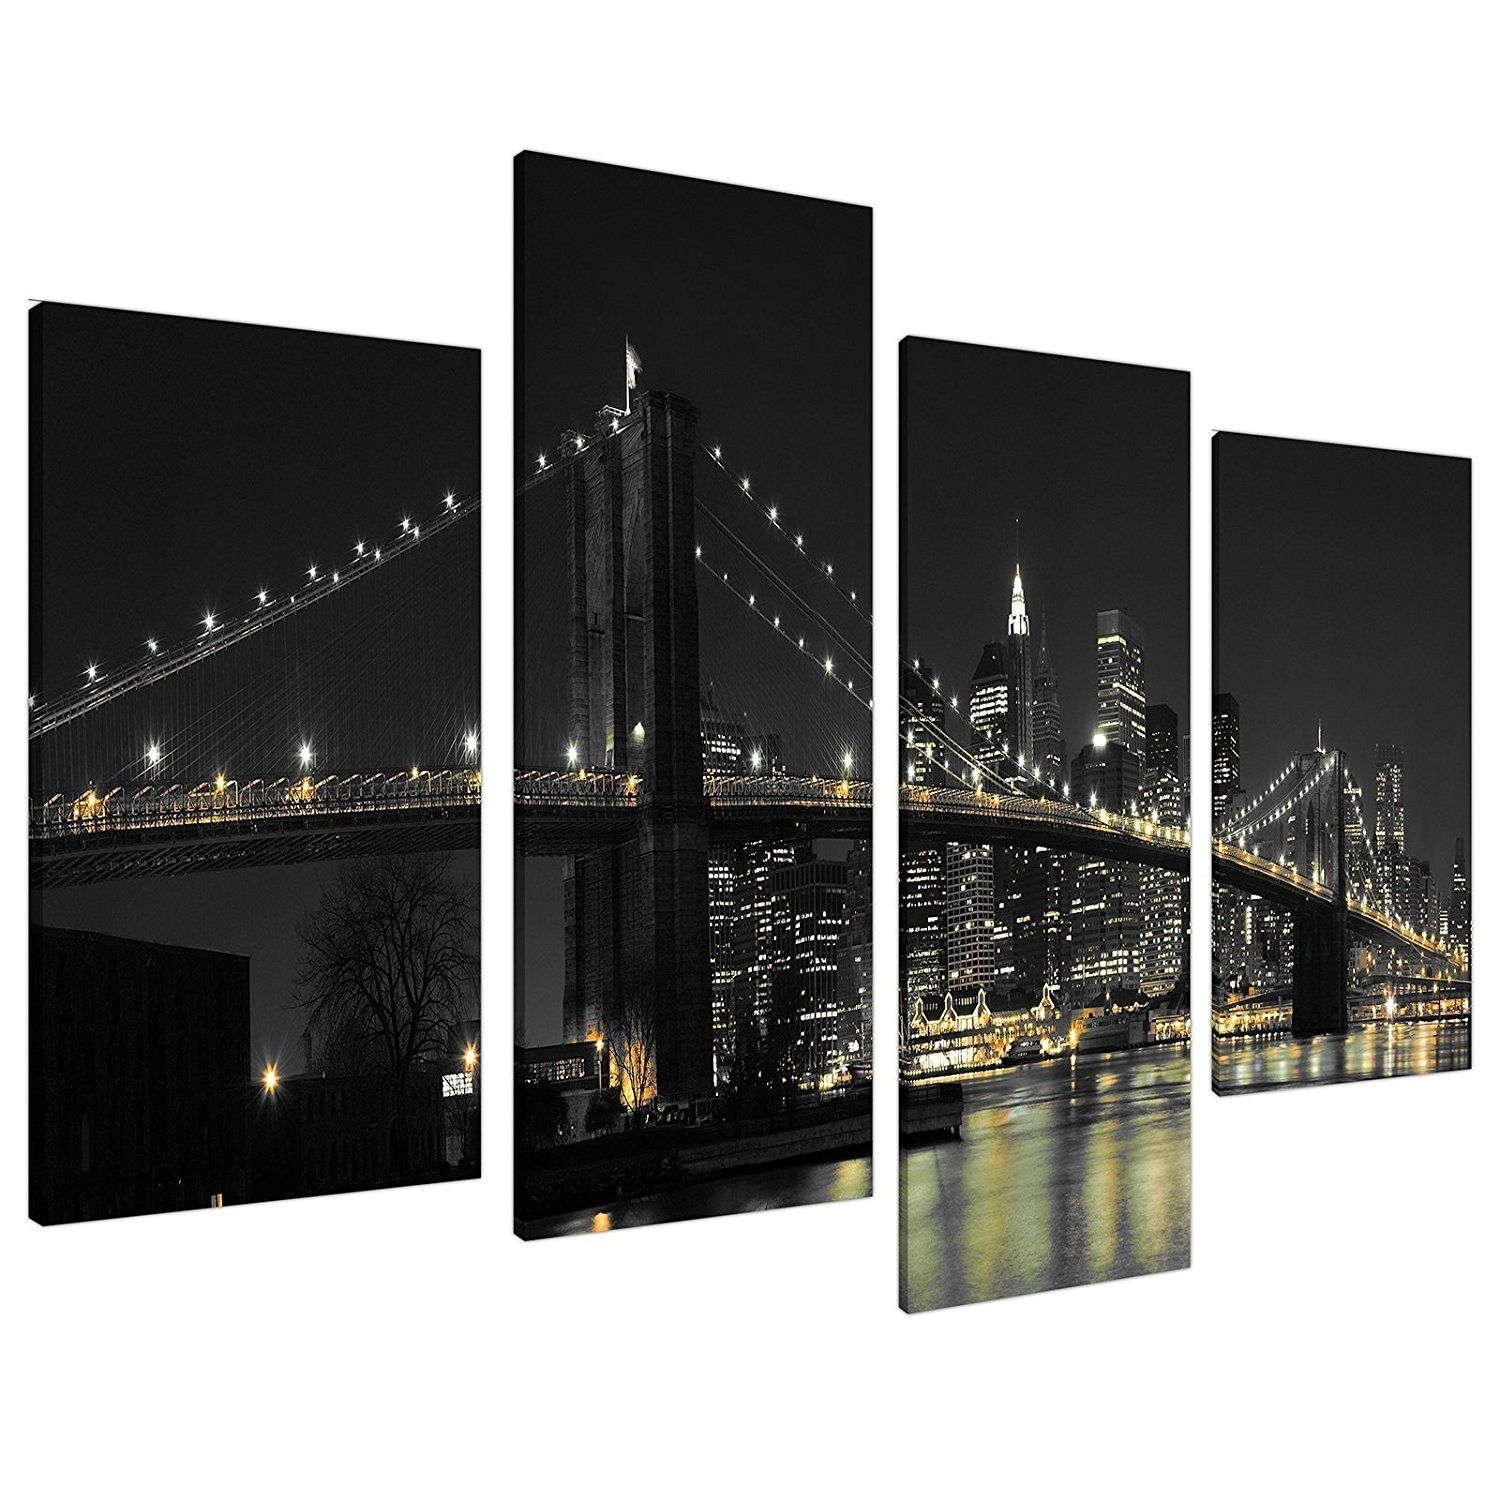 Extraordinary Design New York Canvas Wall Art Best Interior Amazon Inside Black And White Large Canvas Wall Art (View 15 of 20)